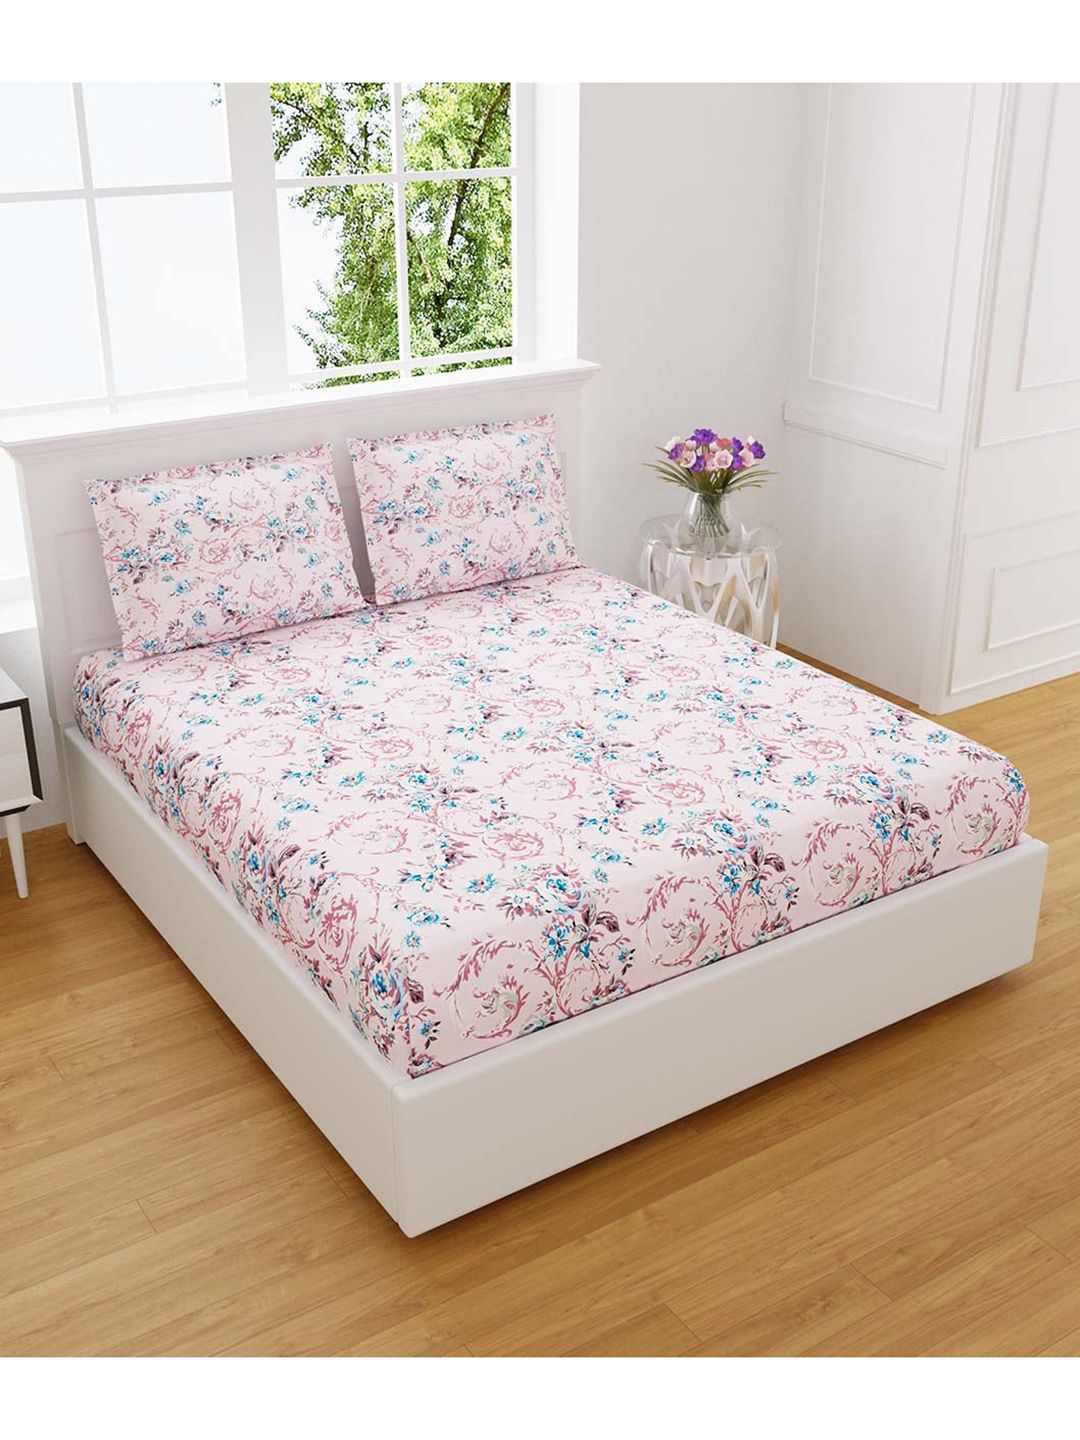 EasyGoods Pink & Blue Floral Cotton 300 TC King Bedsheet with 2 Pillow Covers Price in India